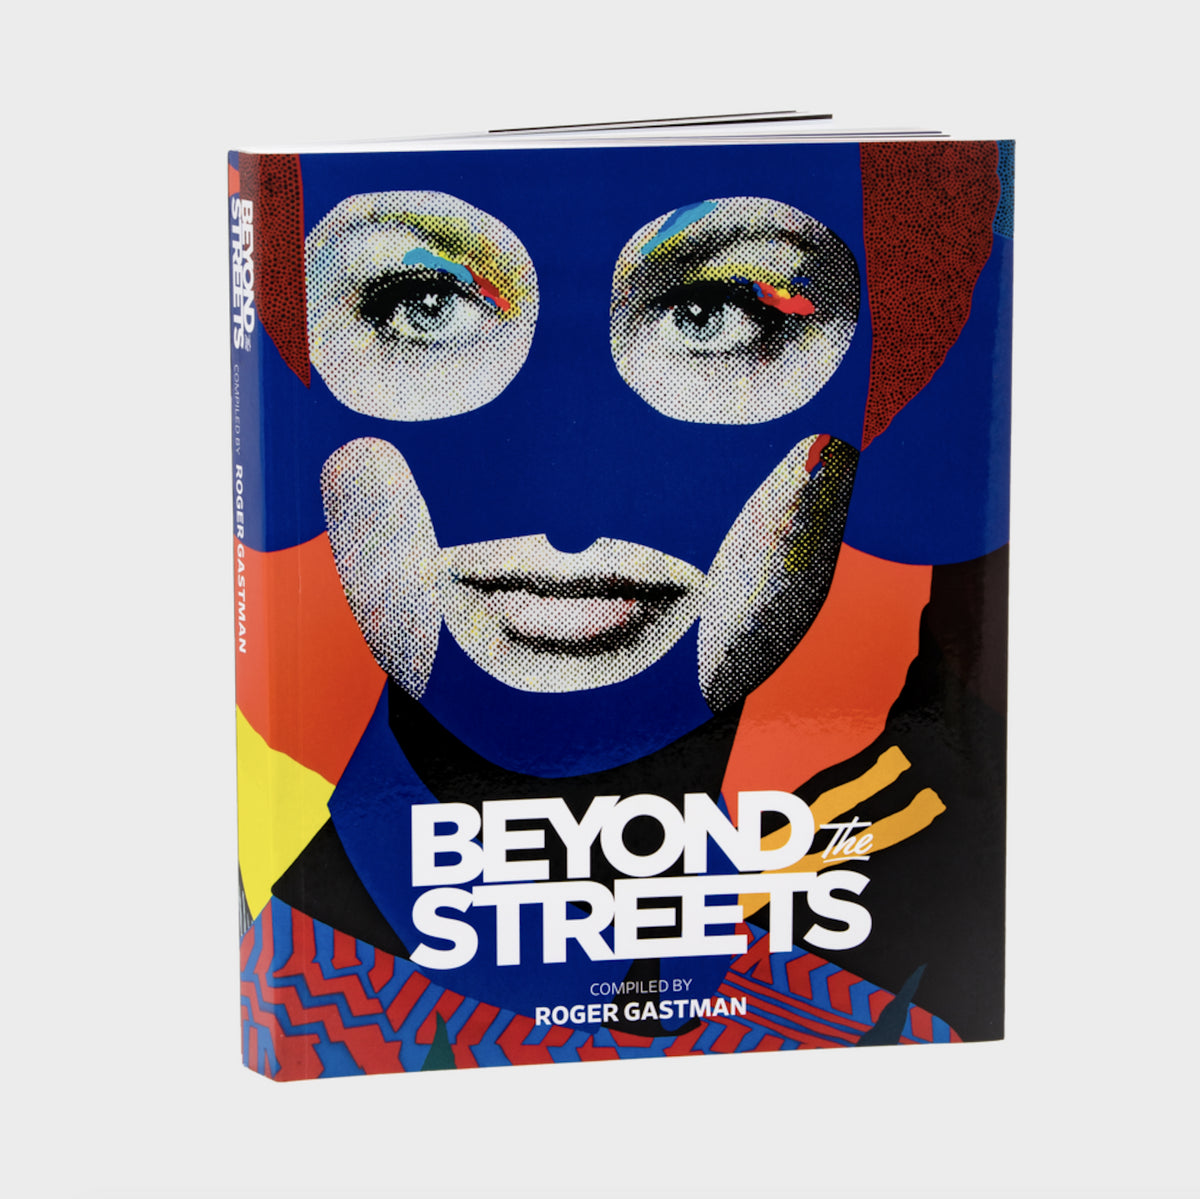 Beyond the Streets